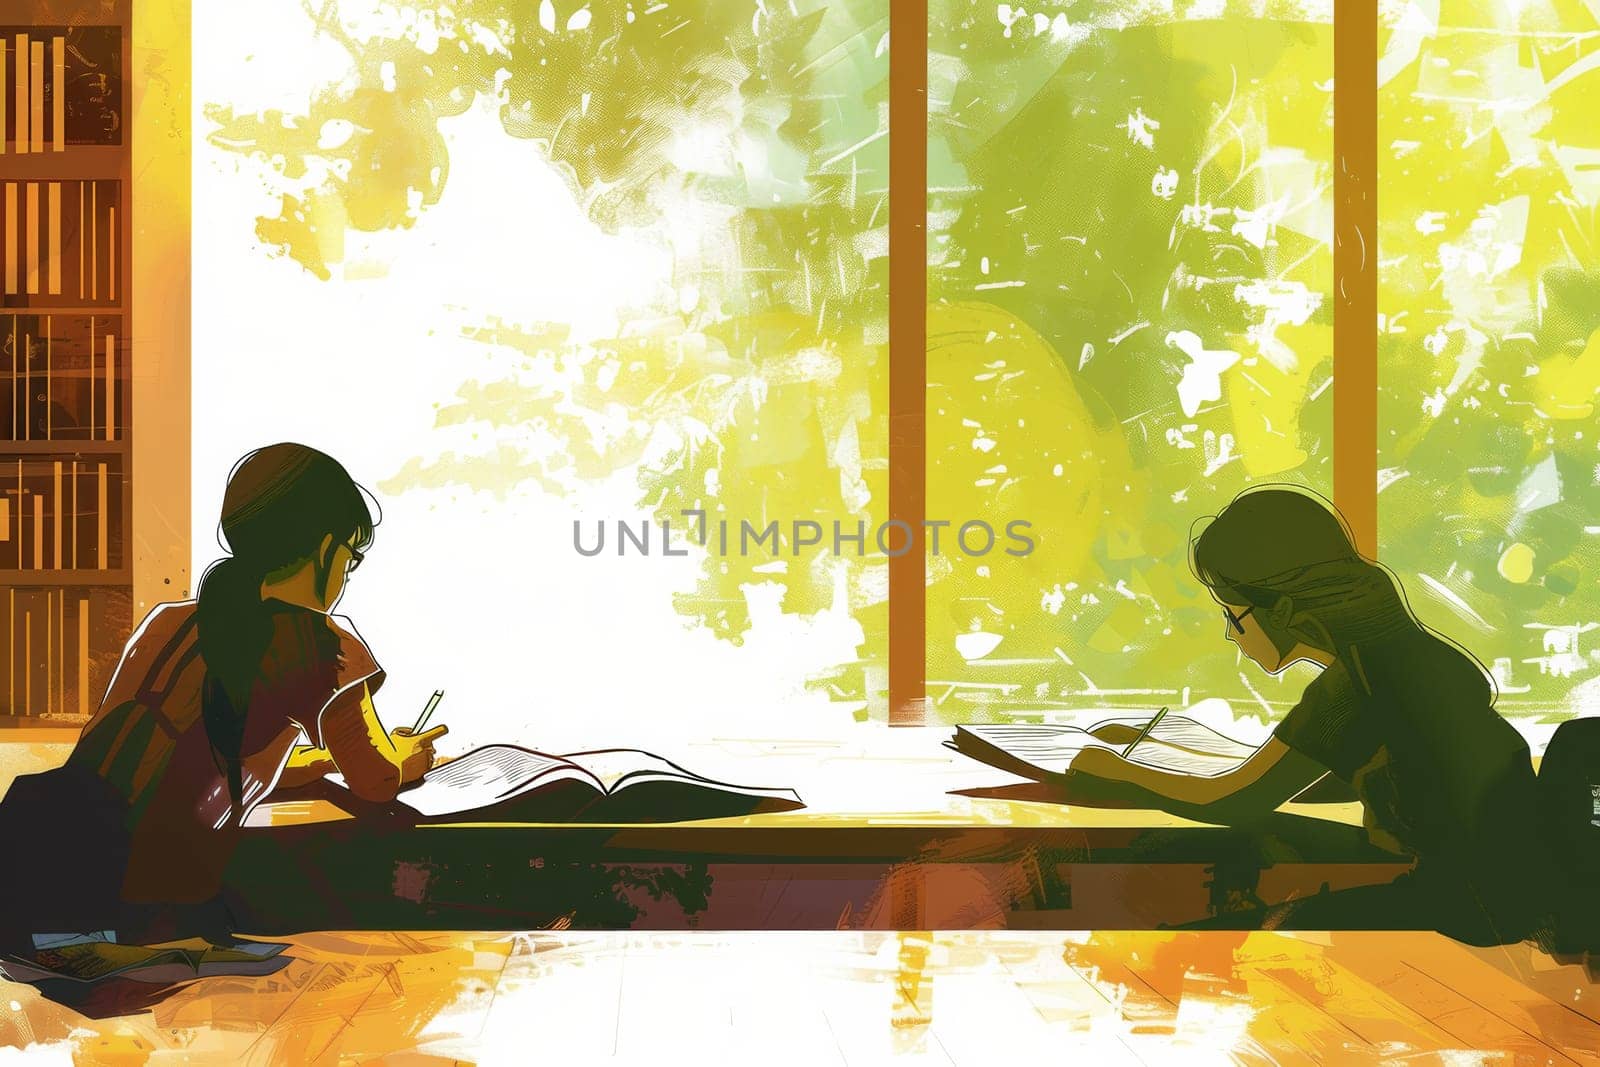 Two individuals engrossed in books while seated at a table, focusing on reading and learning together.